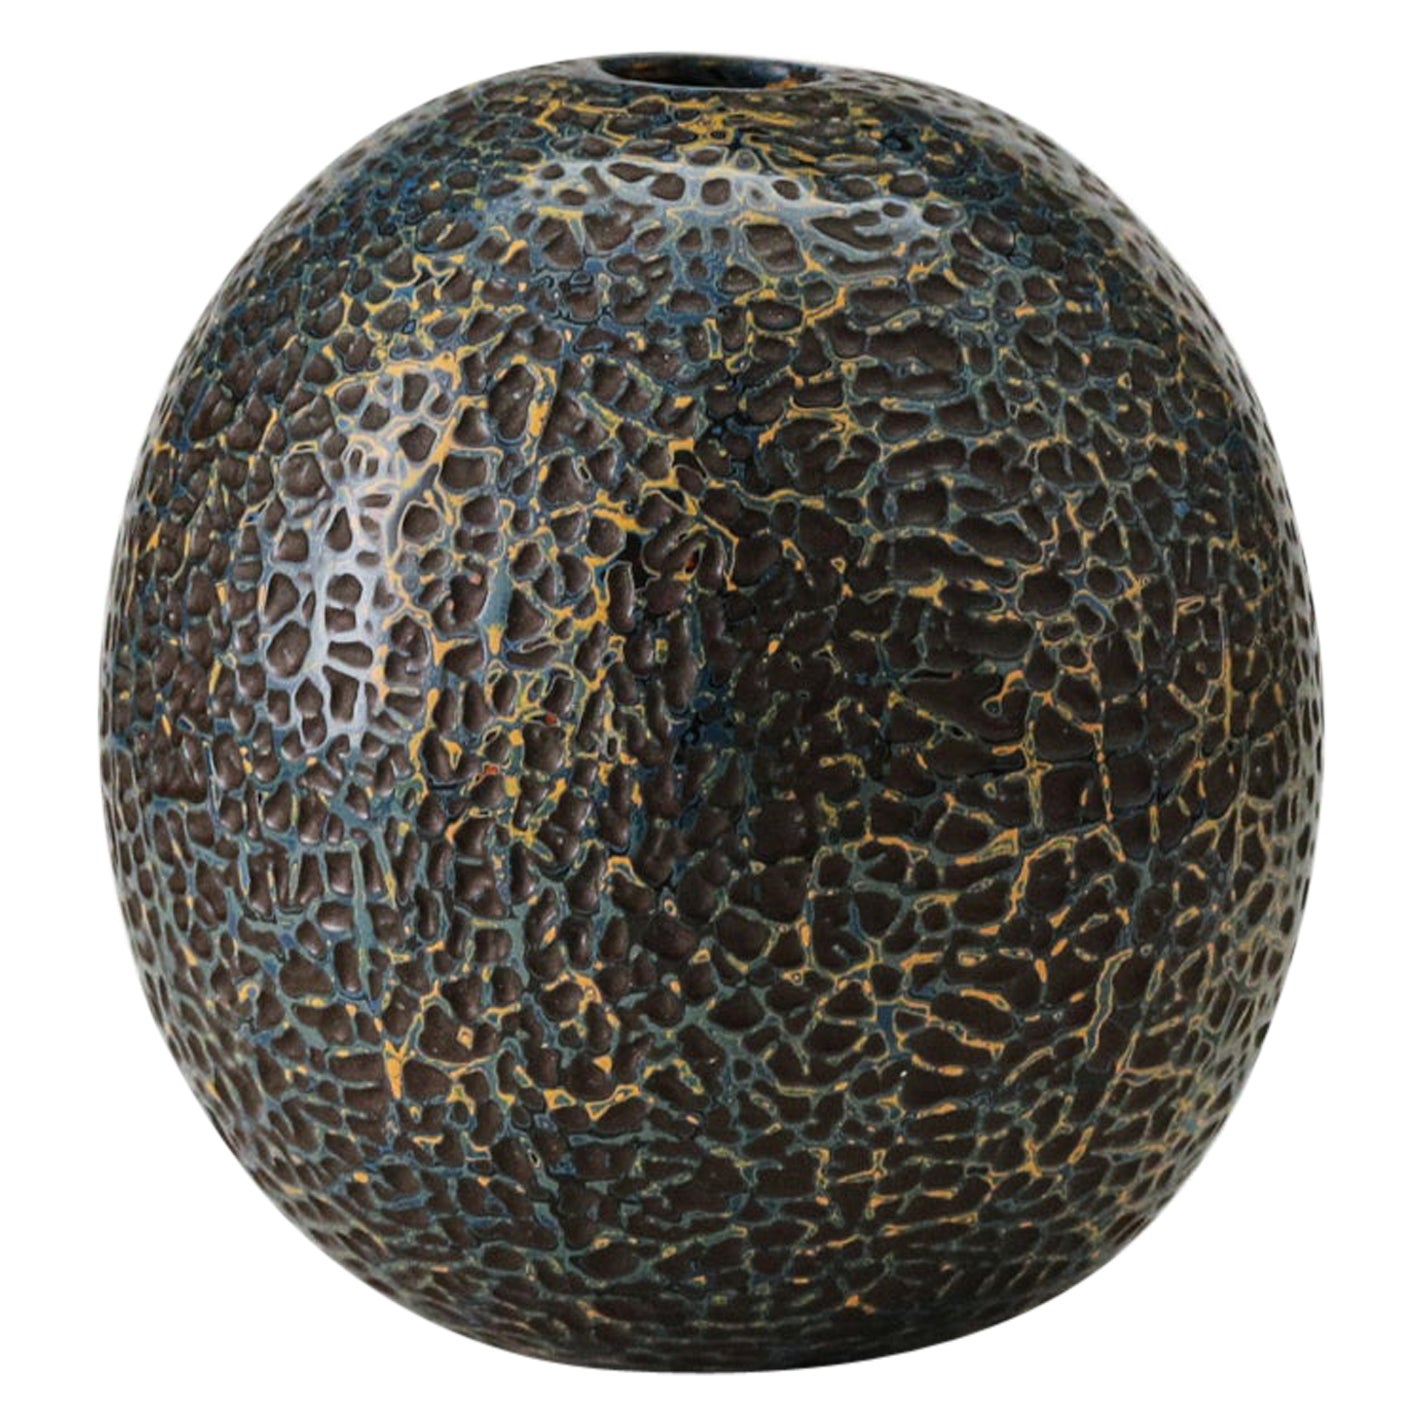 Multiple Layer Textured Urushi Lacquer Small Husk Vase by Alexander Lamont For Sale